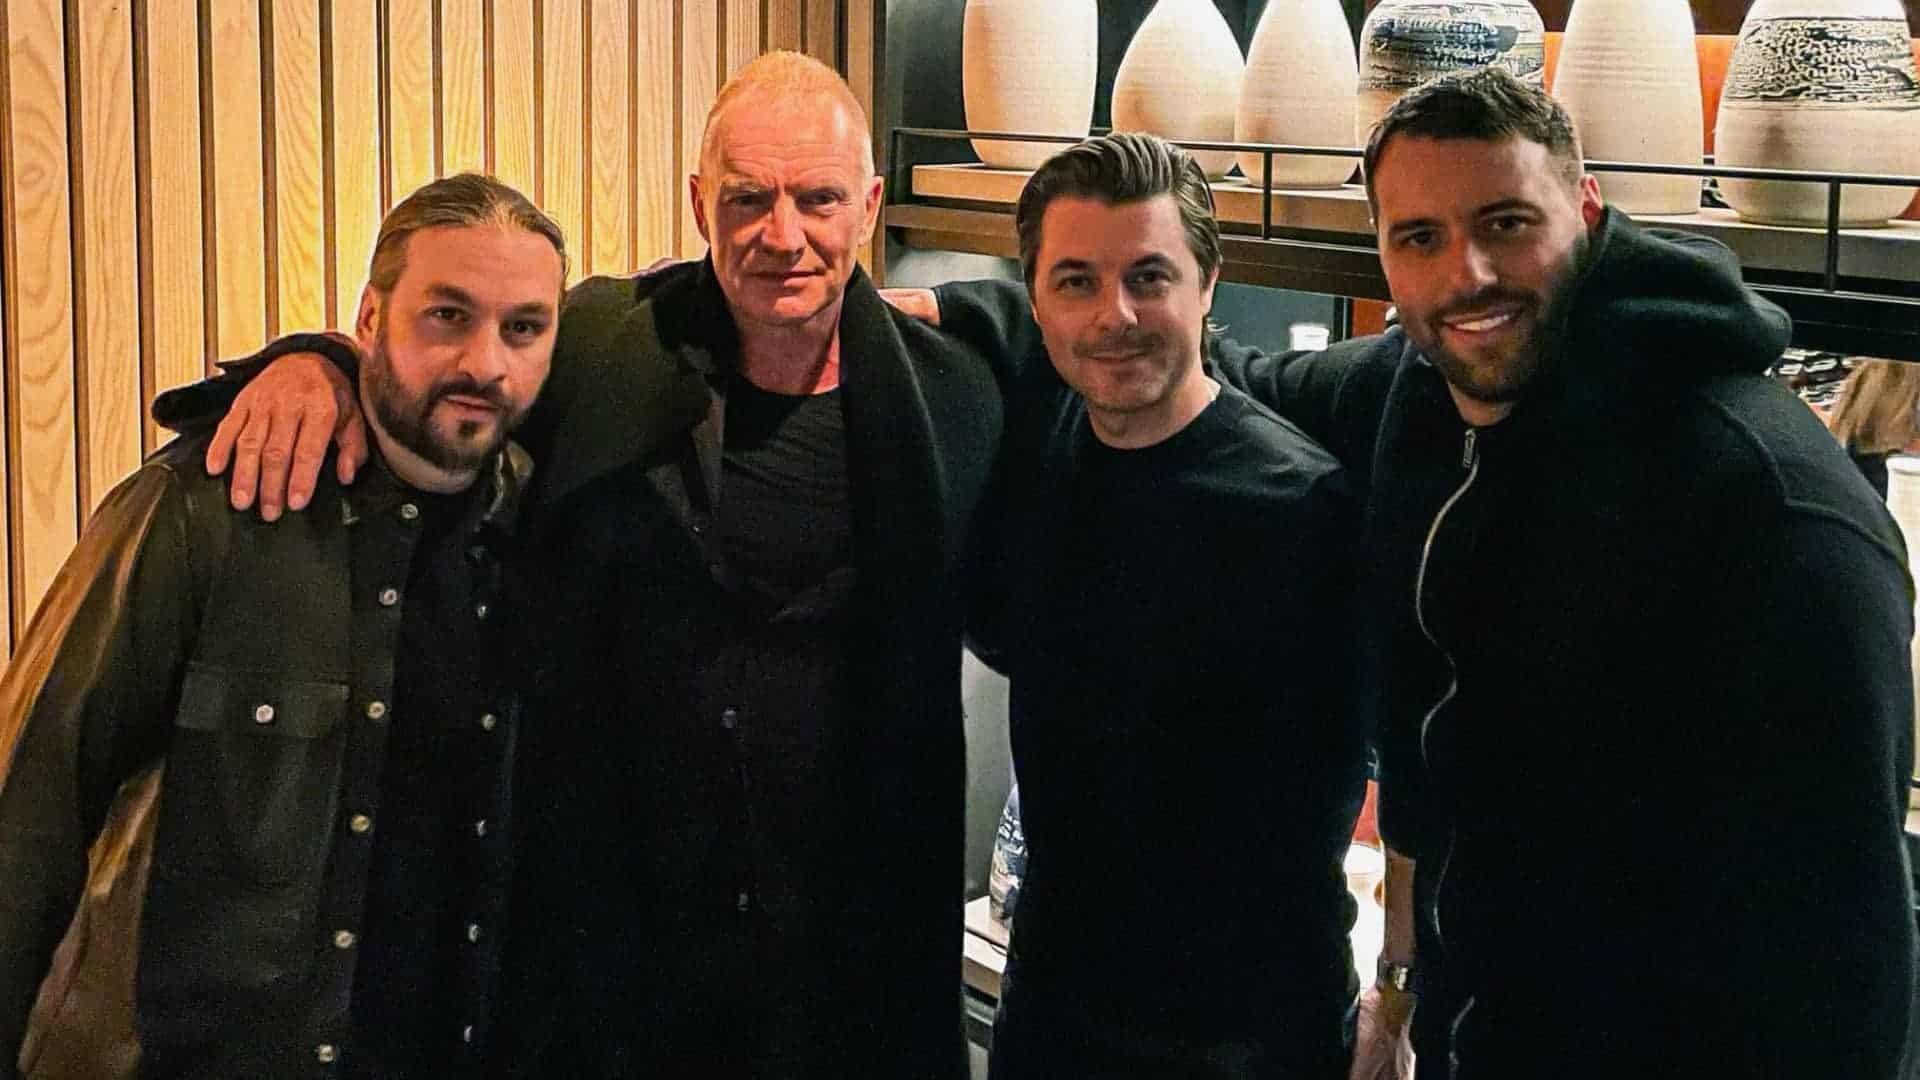 Swedish House Mafia almost had Sting as their special guest for Coachella 2022 performance